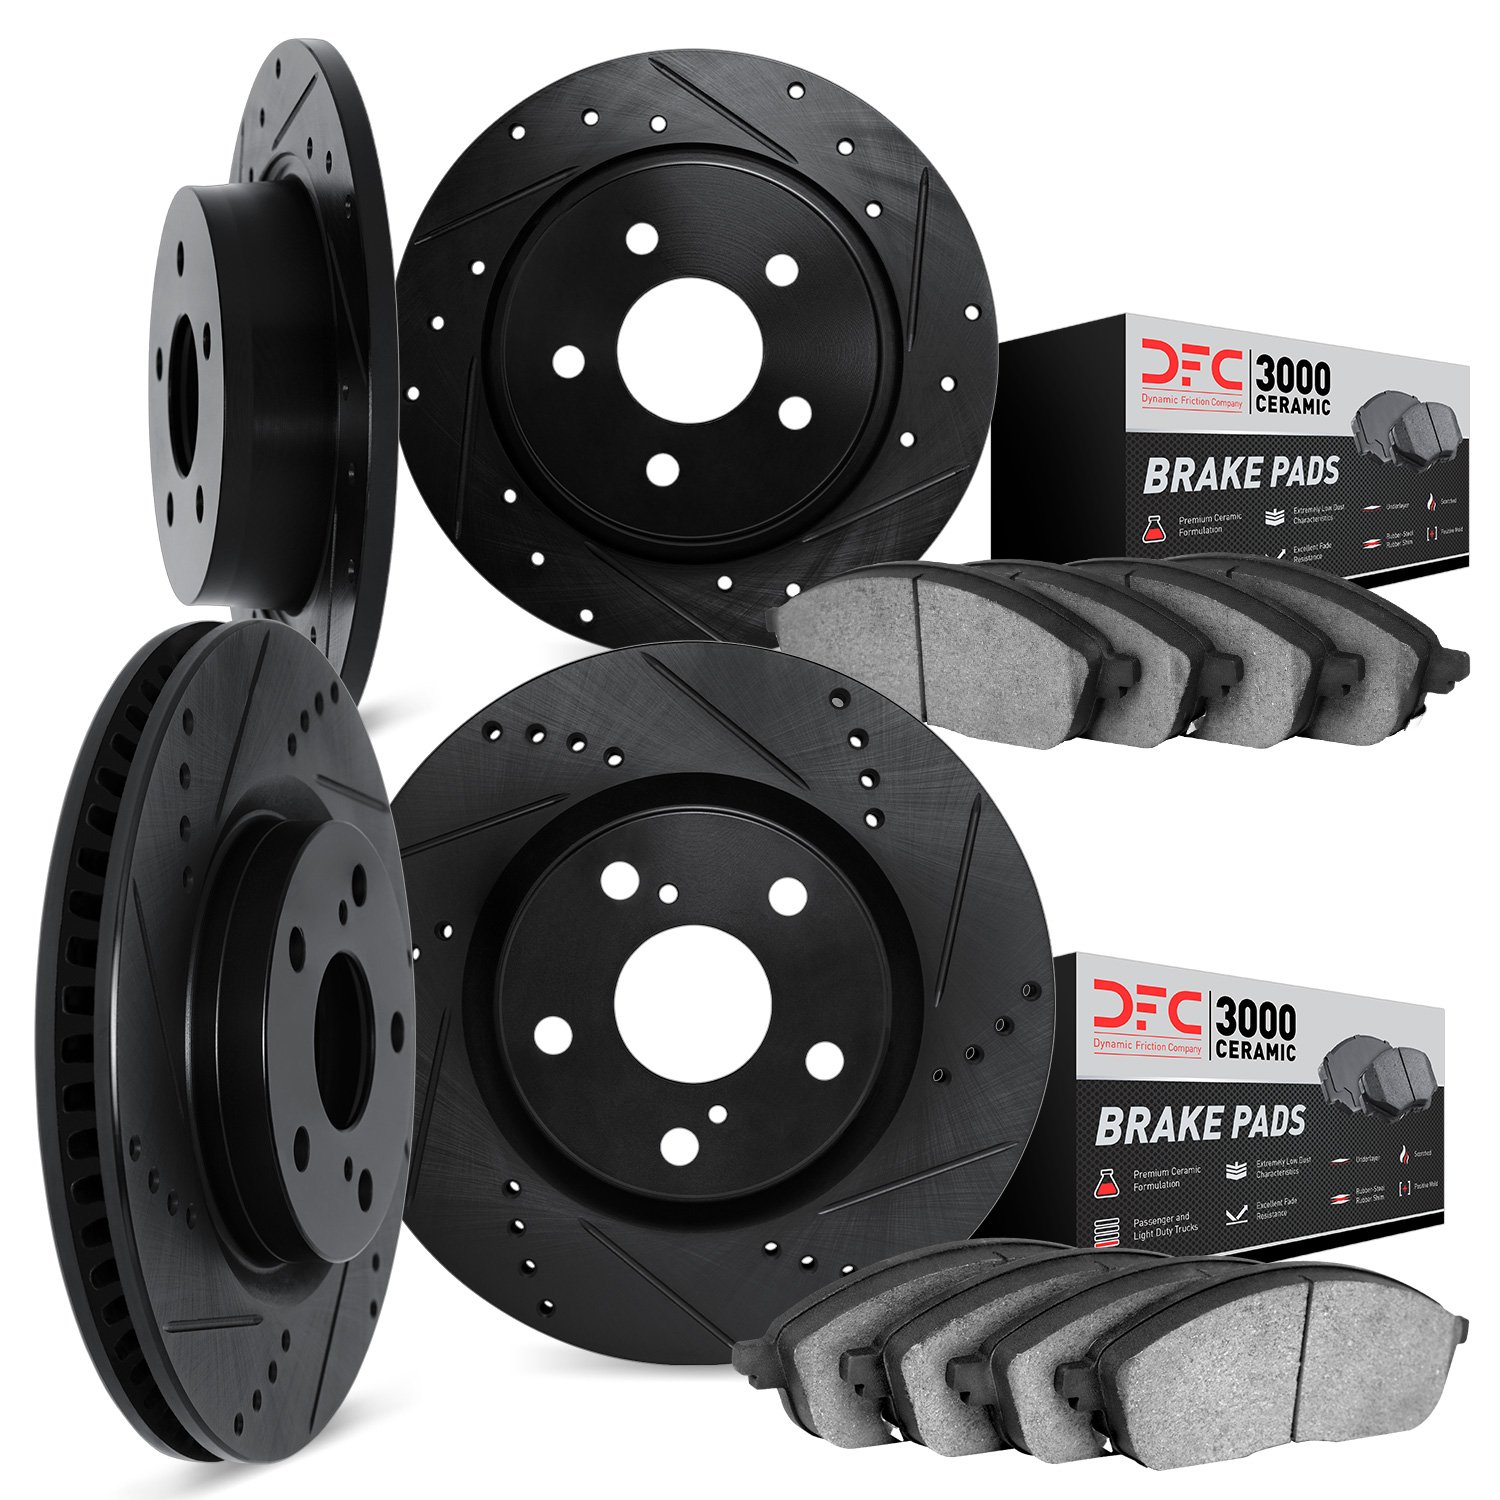 8304-42005 Drilled/Slotted Brake Rotors with 3000-Series Ceramic Brake Pads Kit [Black], 2003-2007 Mopar, Position: Front and Re